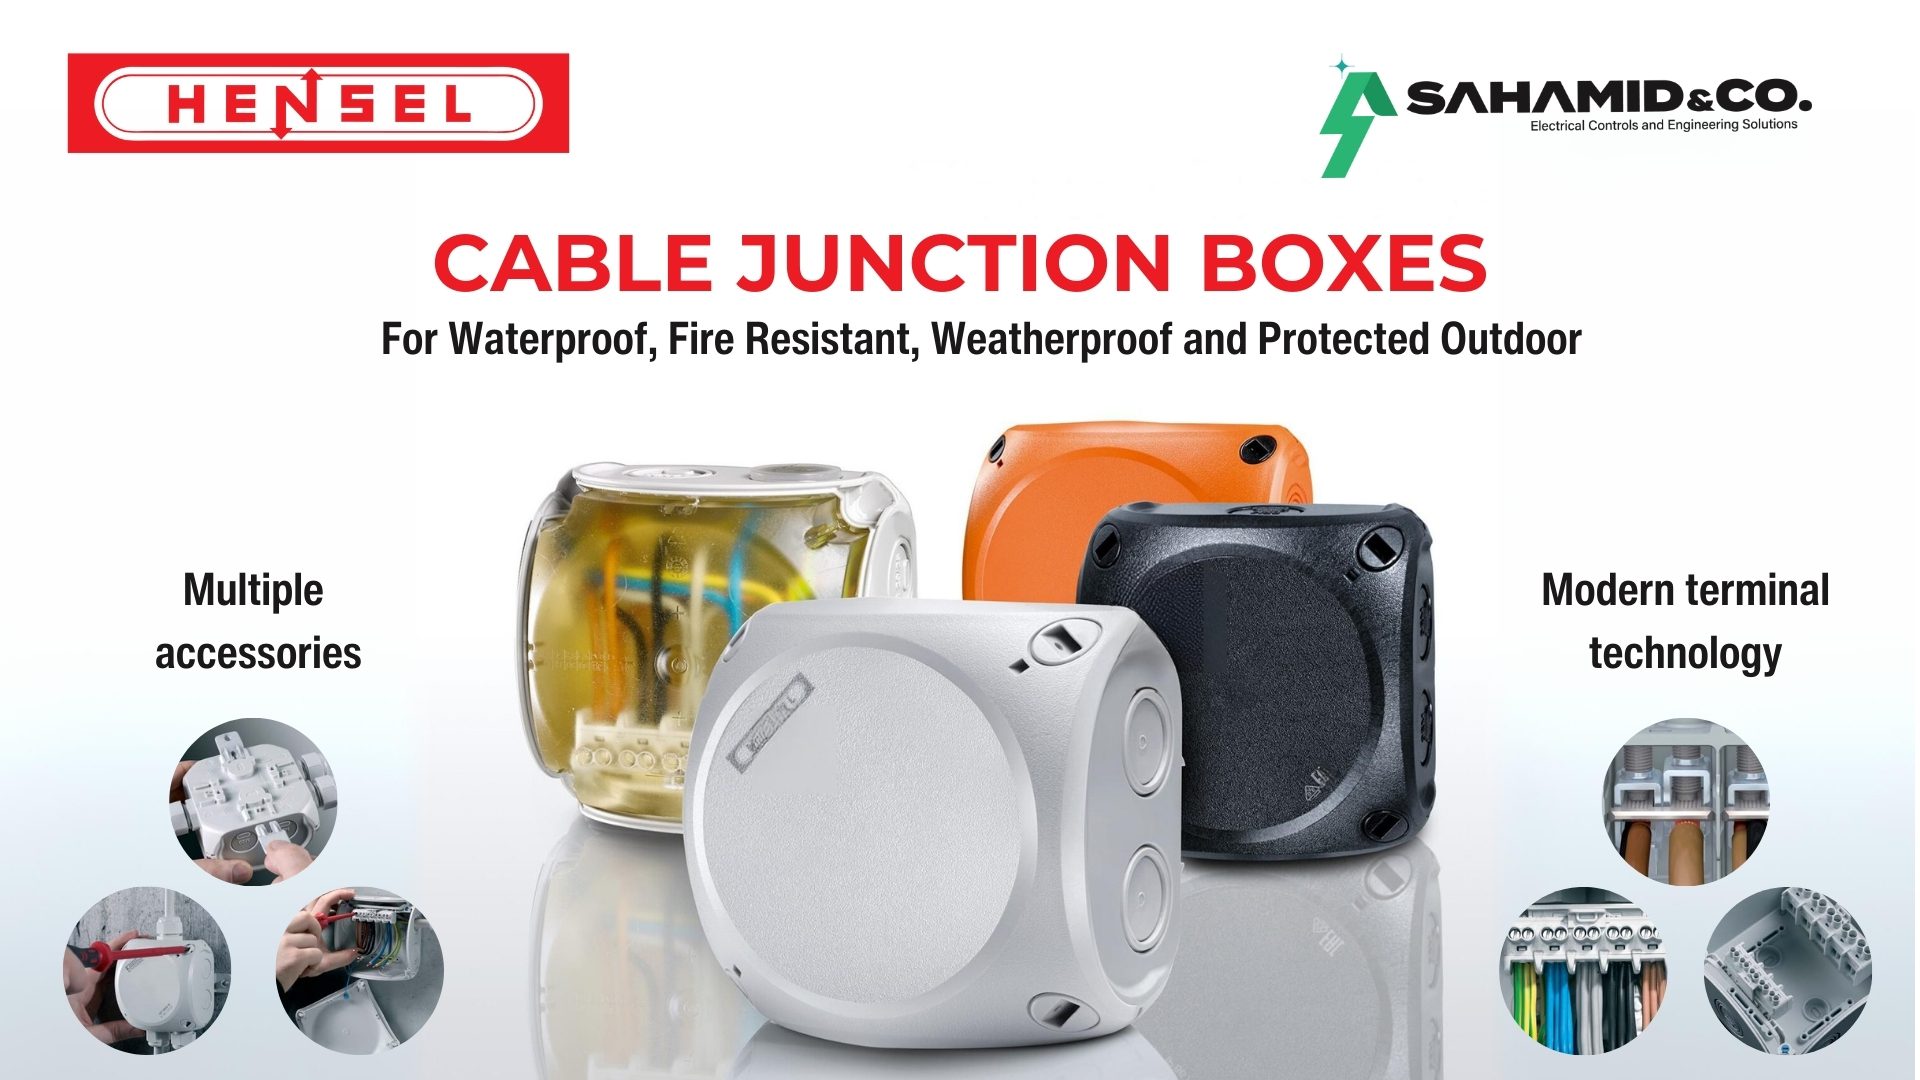 S. A. Hamid & Co. offers Hensel Junction Boxes in Pakistan